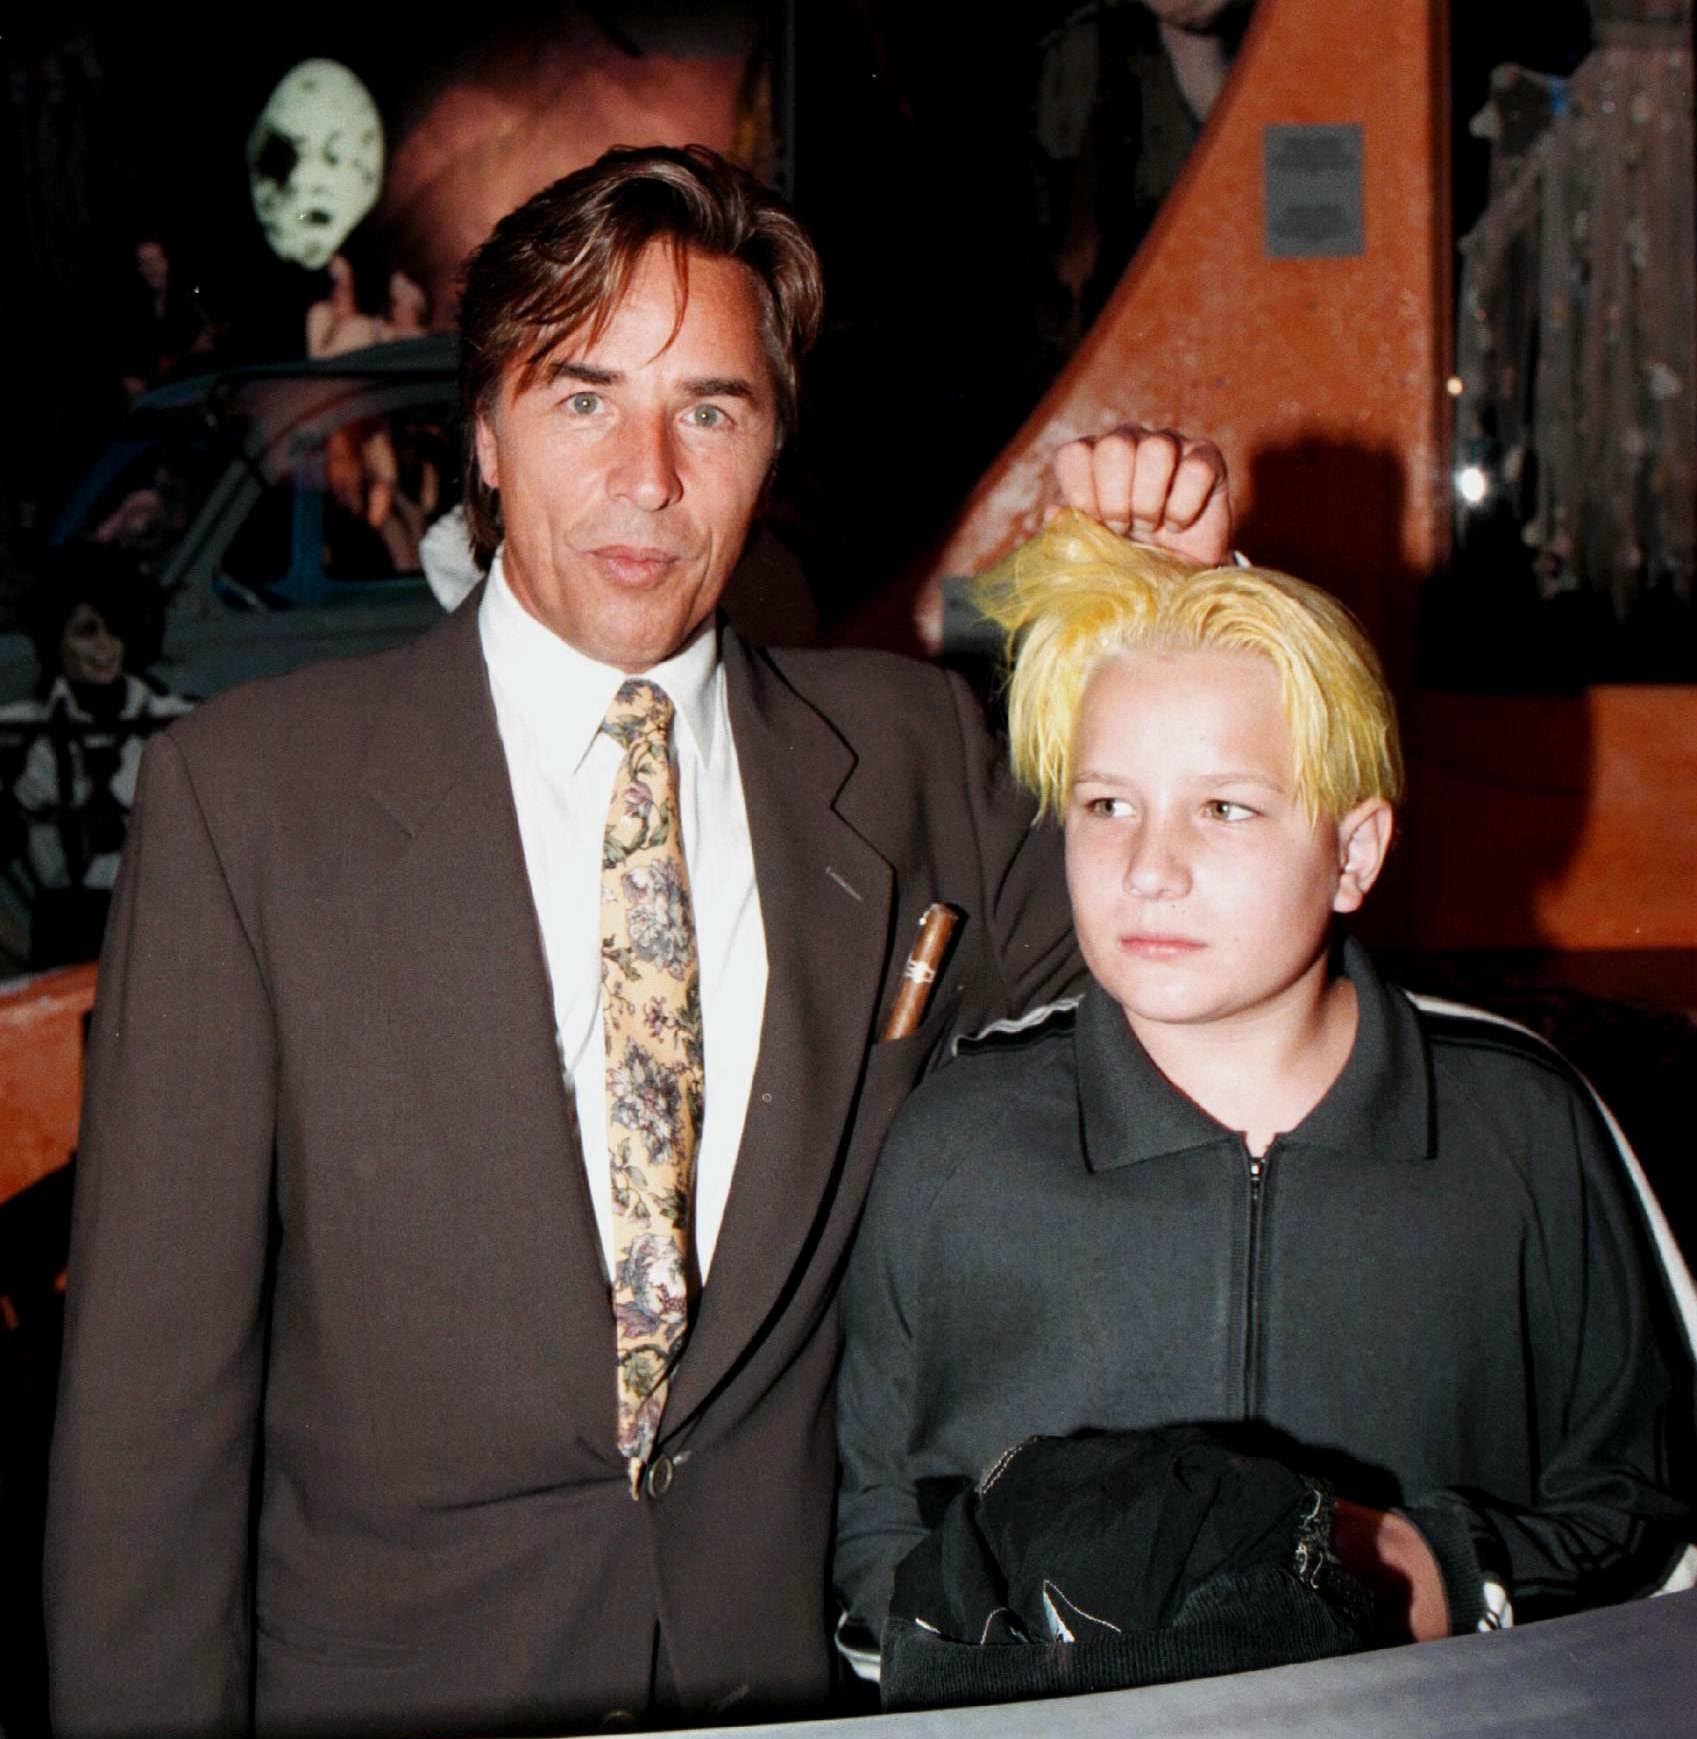 <p>"Miami Vice" star Don Johnson brought son Jesse Johnson -- whose mom is model-actress Patti D'Arbanville -- to an event at Planet Hollywood in Paris in September 1995 when Jesse was just 12. Keep reading to see him all grown up -- and to see his half-sister Grace Johnson as a little girl kid who's since grown up too...</p>